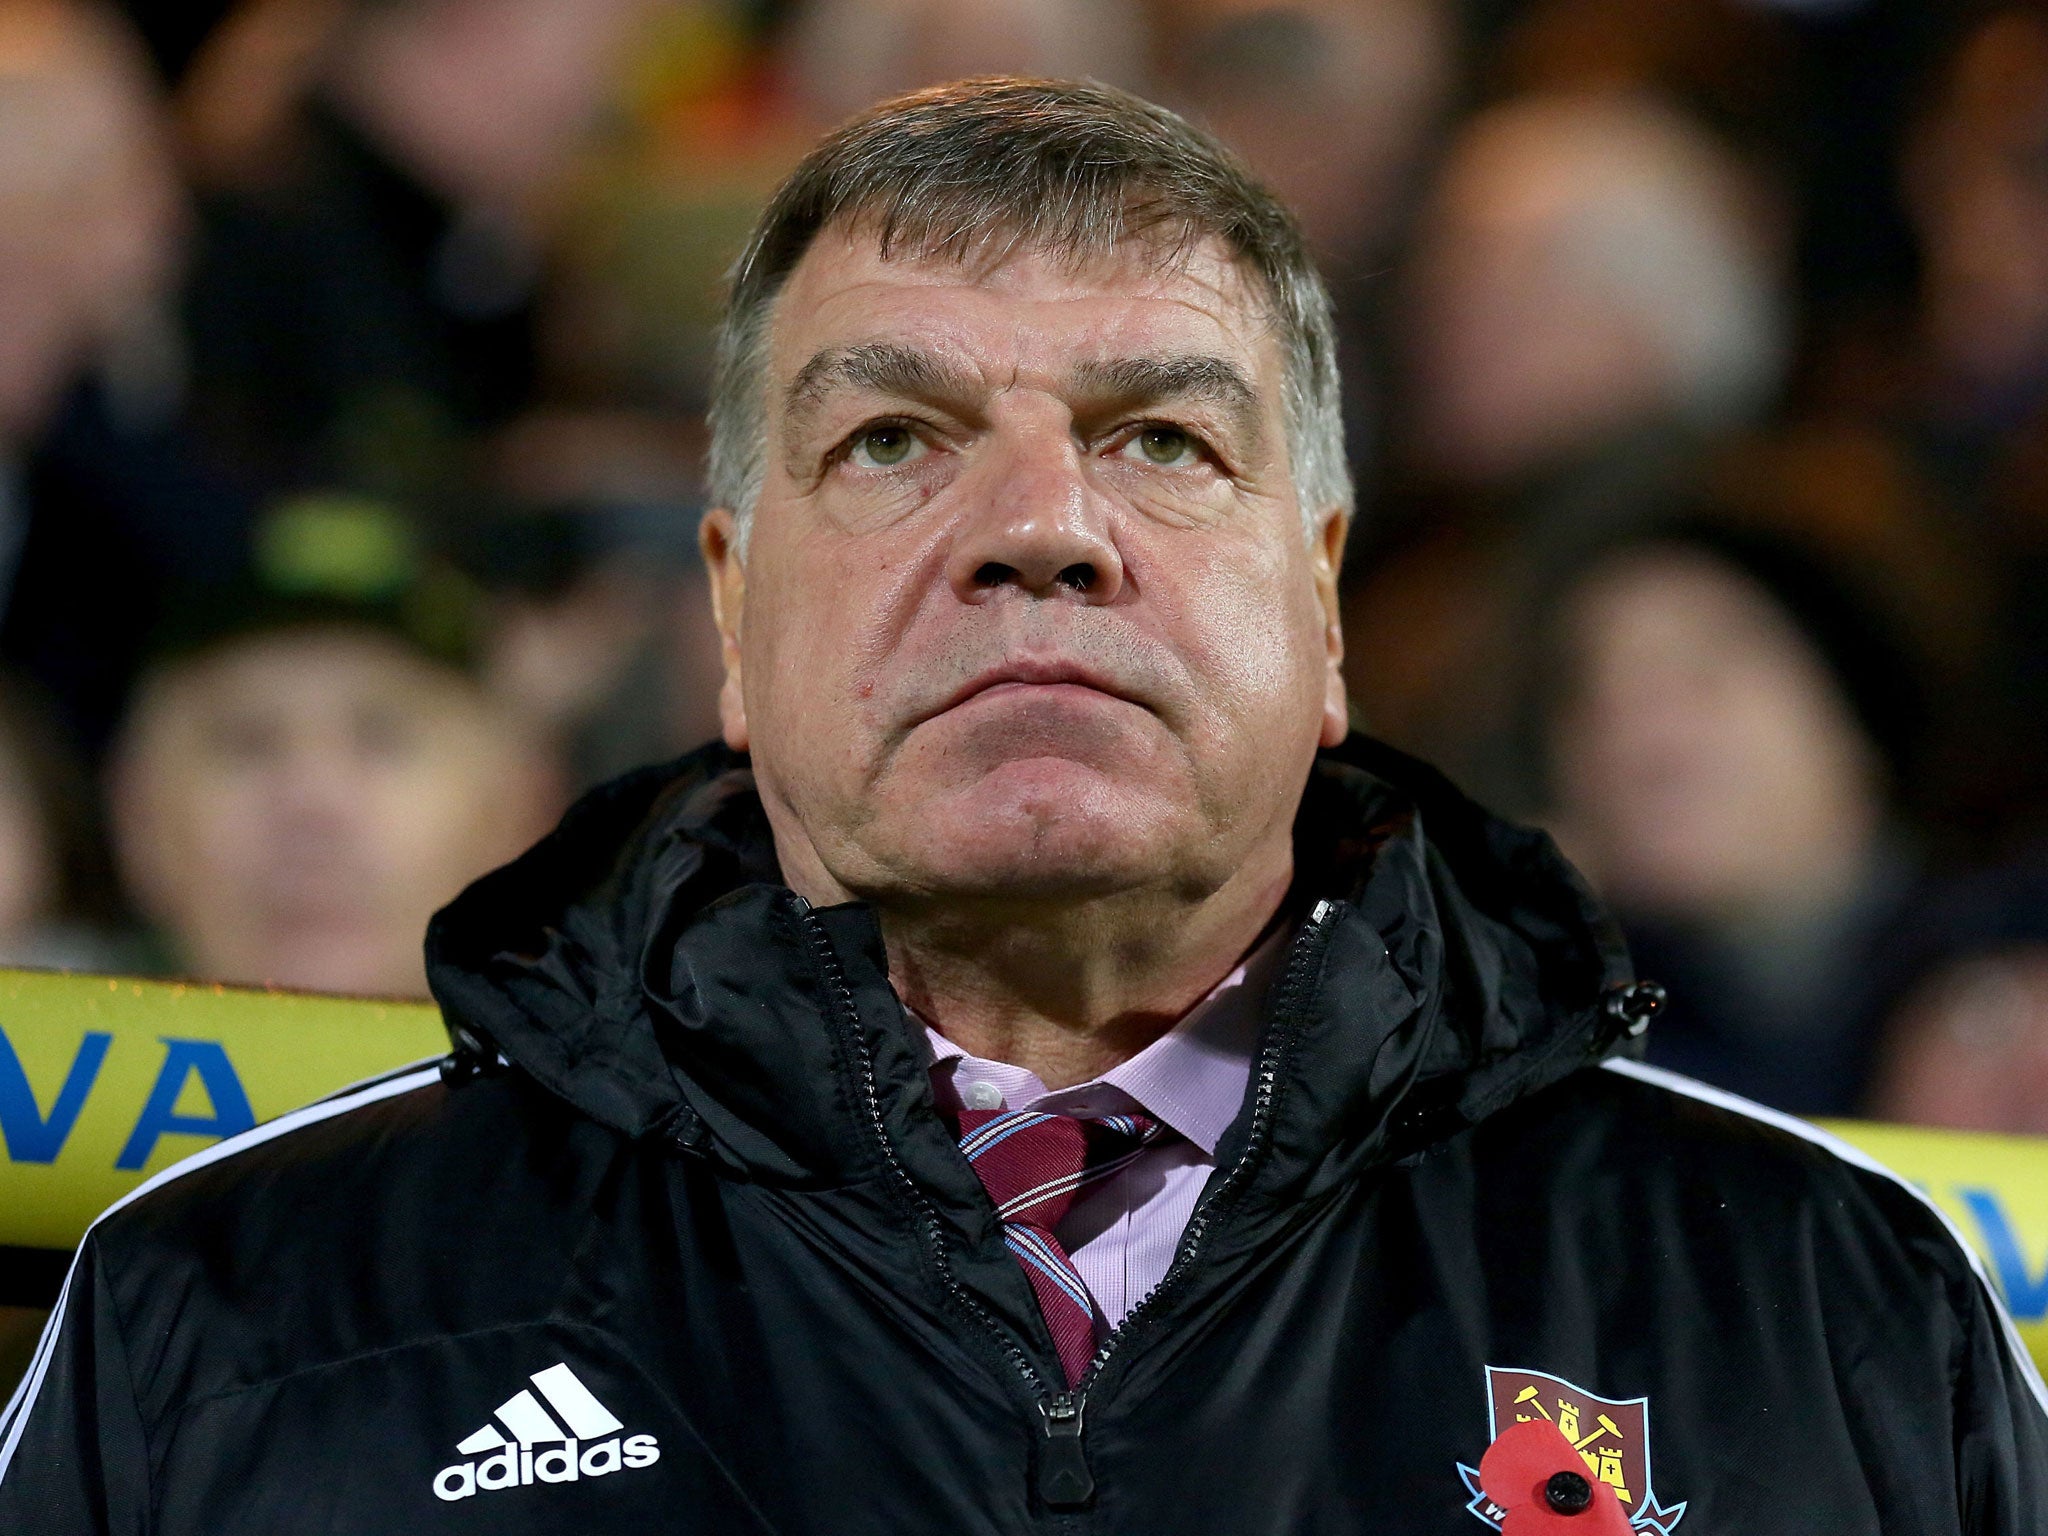 The West Ham owners fell short of giving manager Sam Allardyce their complete backing